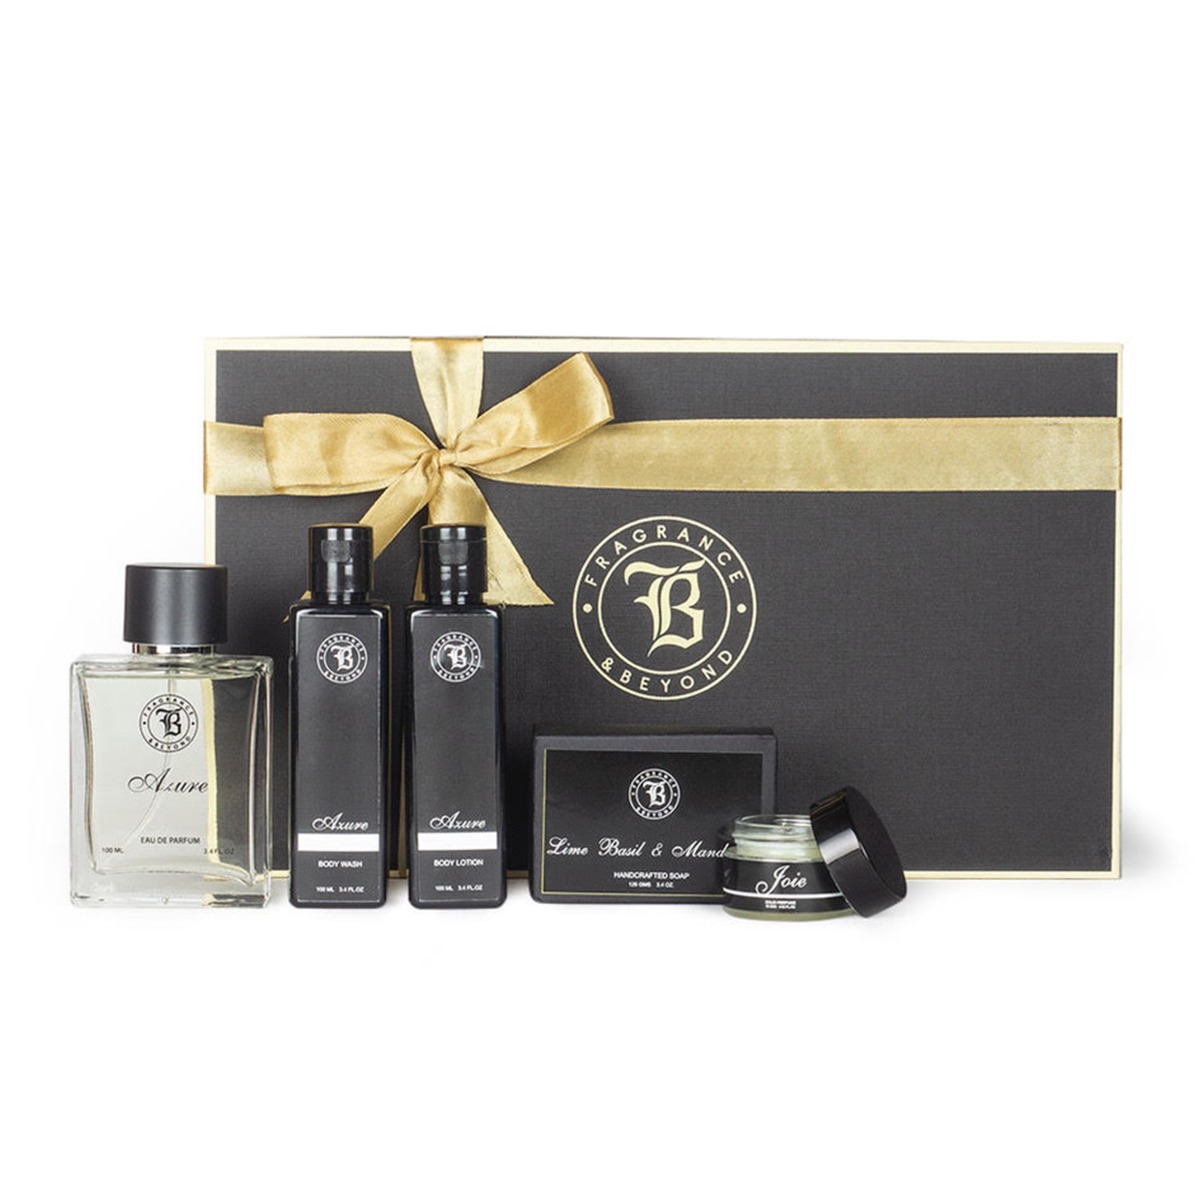 Fragrance & Beyond Ultimate Perfume Gift Set for Men, Perfume 80ml + Body wash 100ml + Body lotion 100ml + Soap 125 gm + Solid Perfume 15gm - 5 piece set